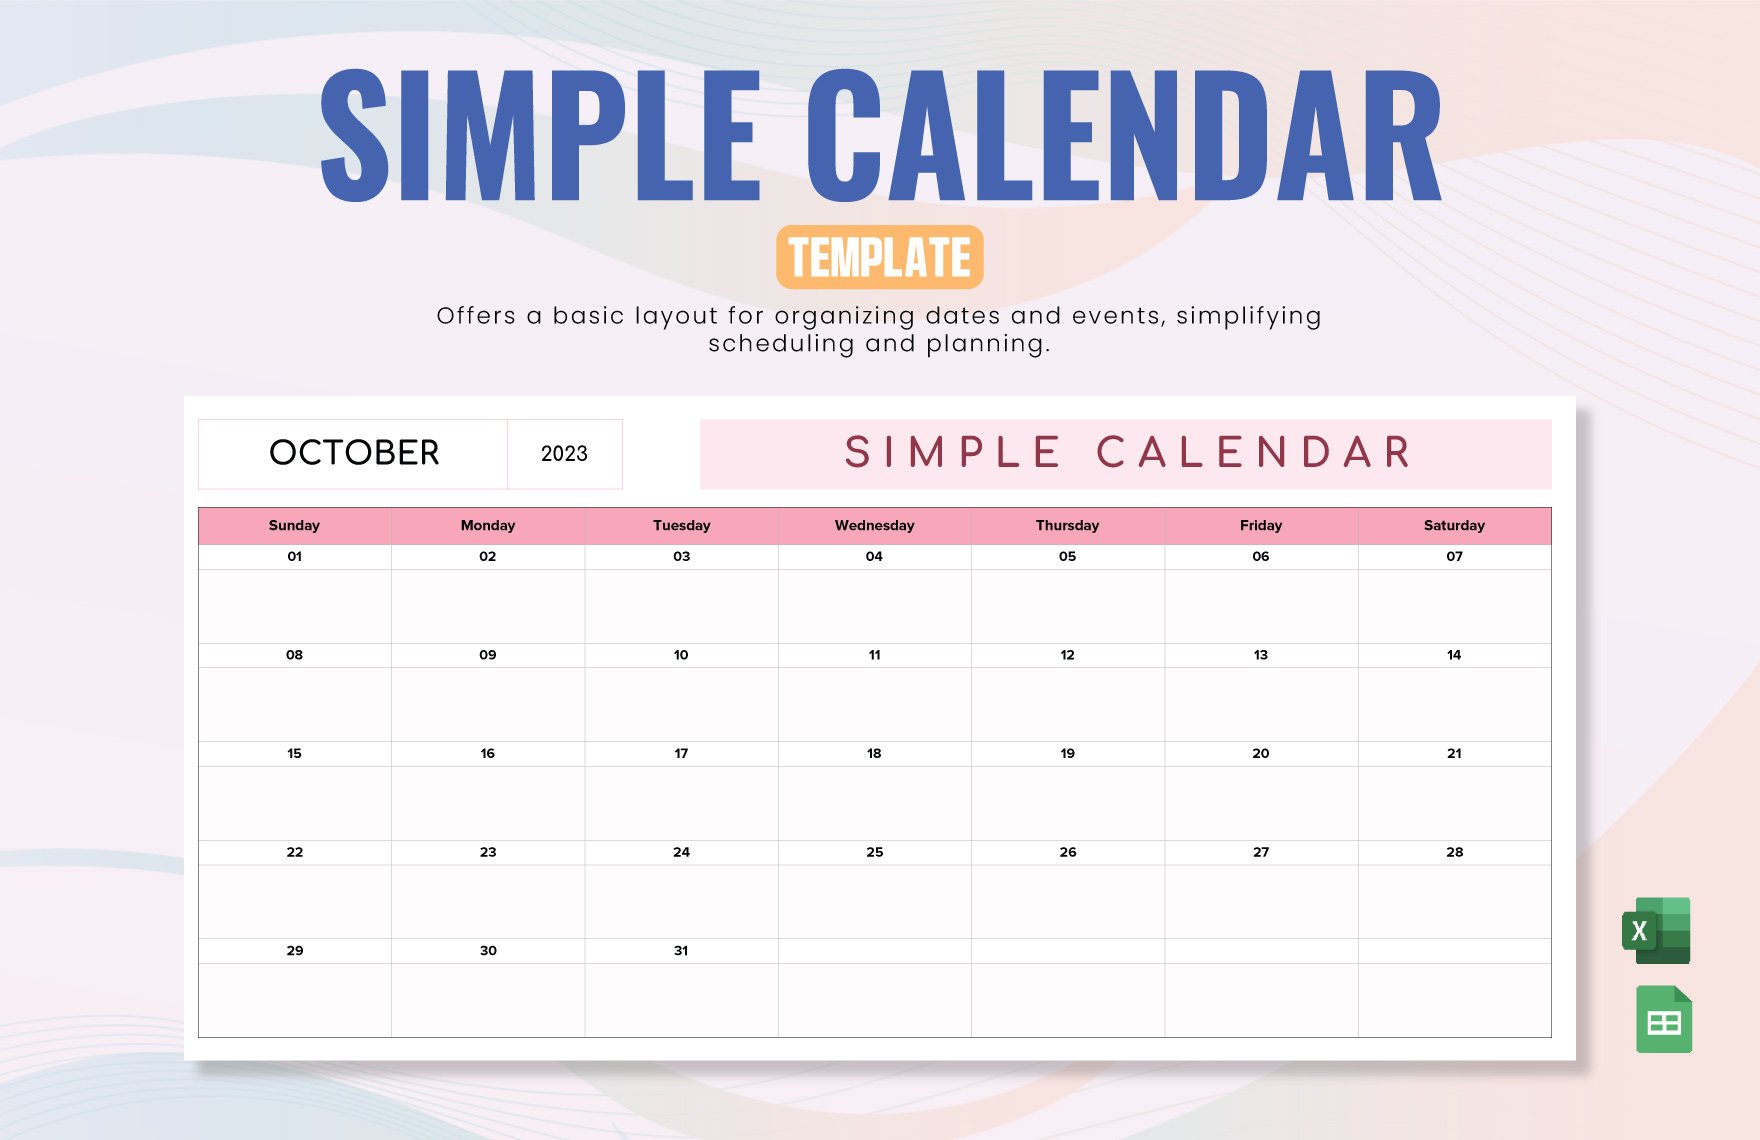 Free Simple Calendar Template in Excel, Google Sheets, Adobe XD